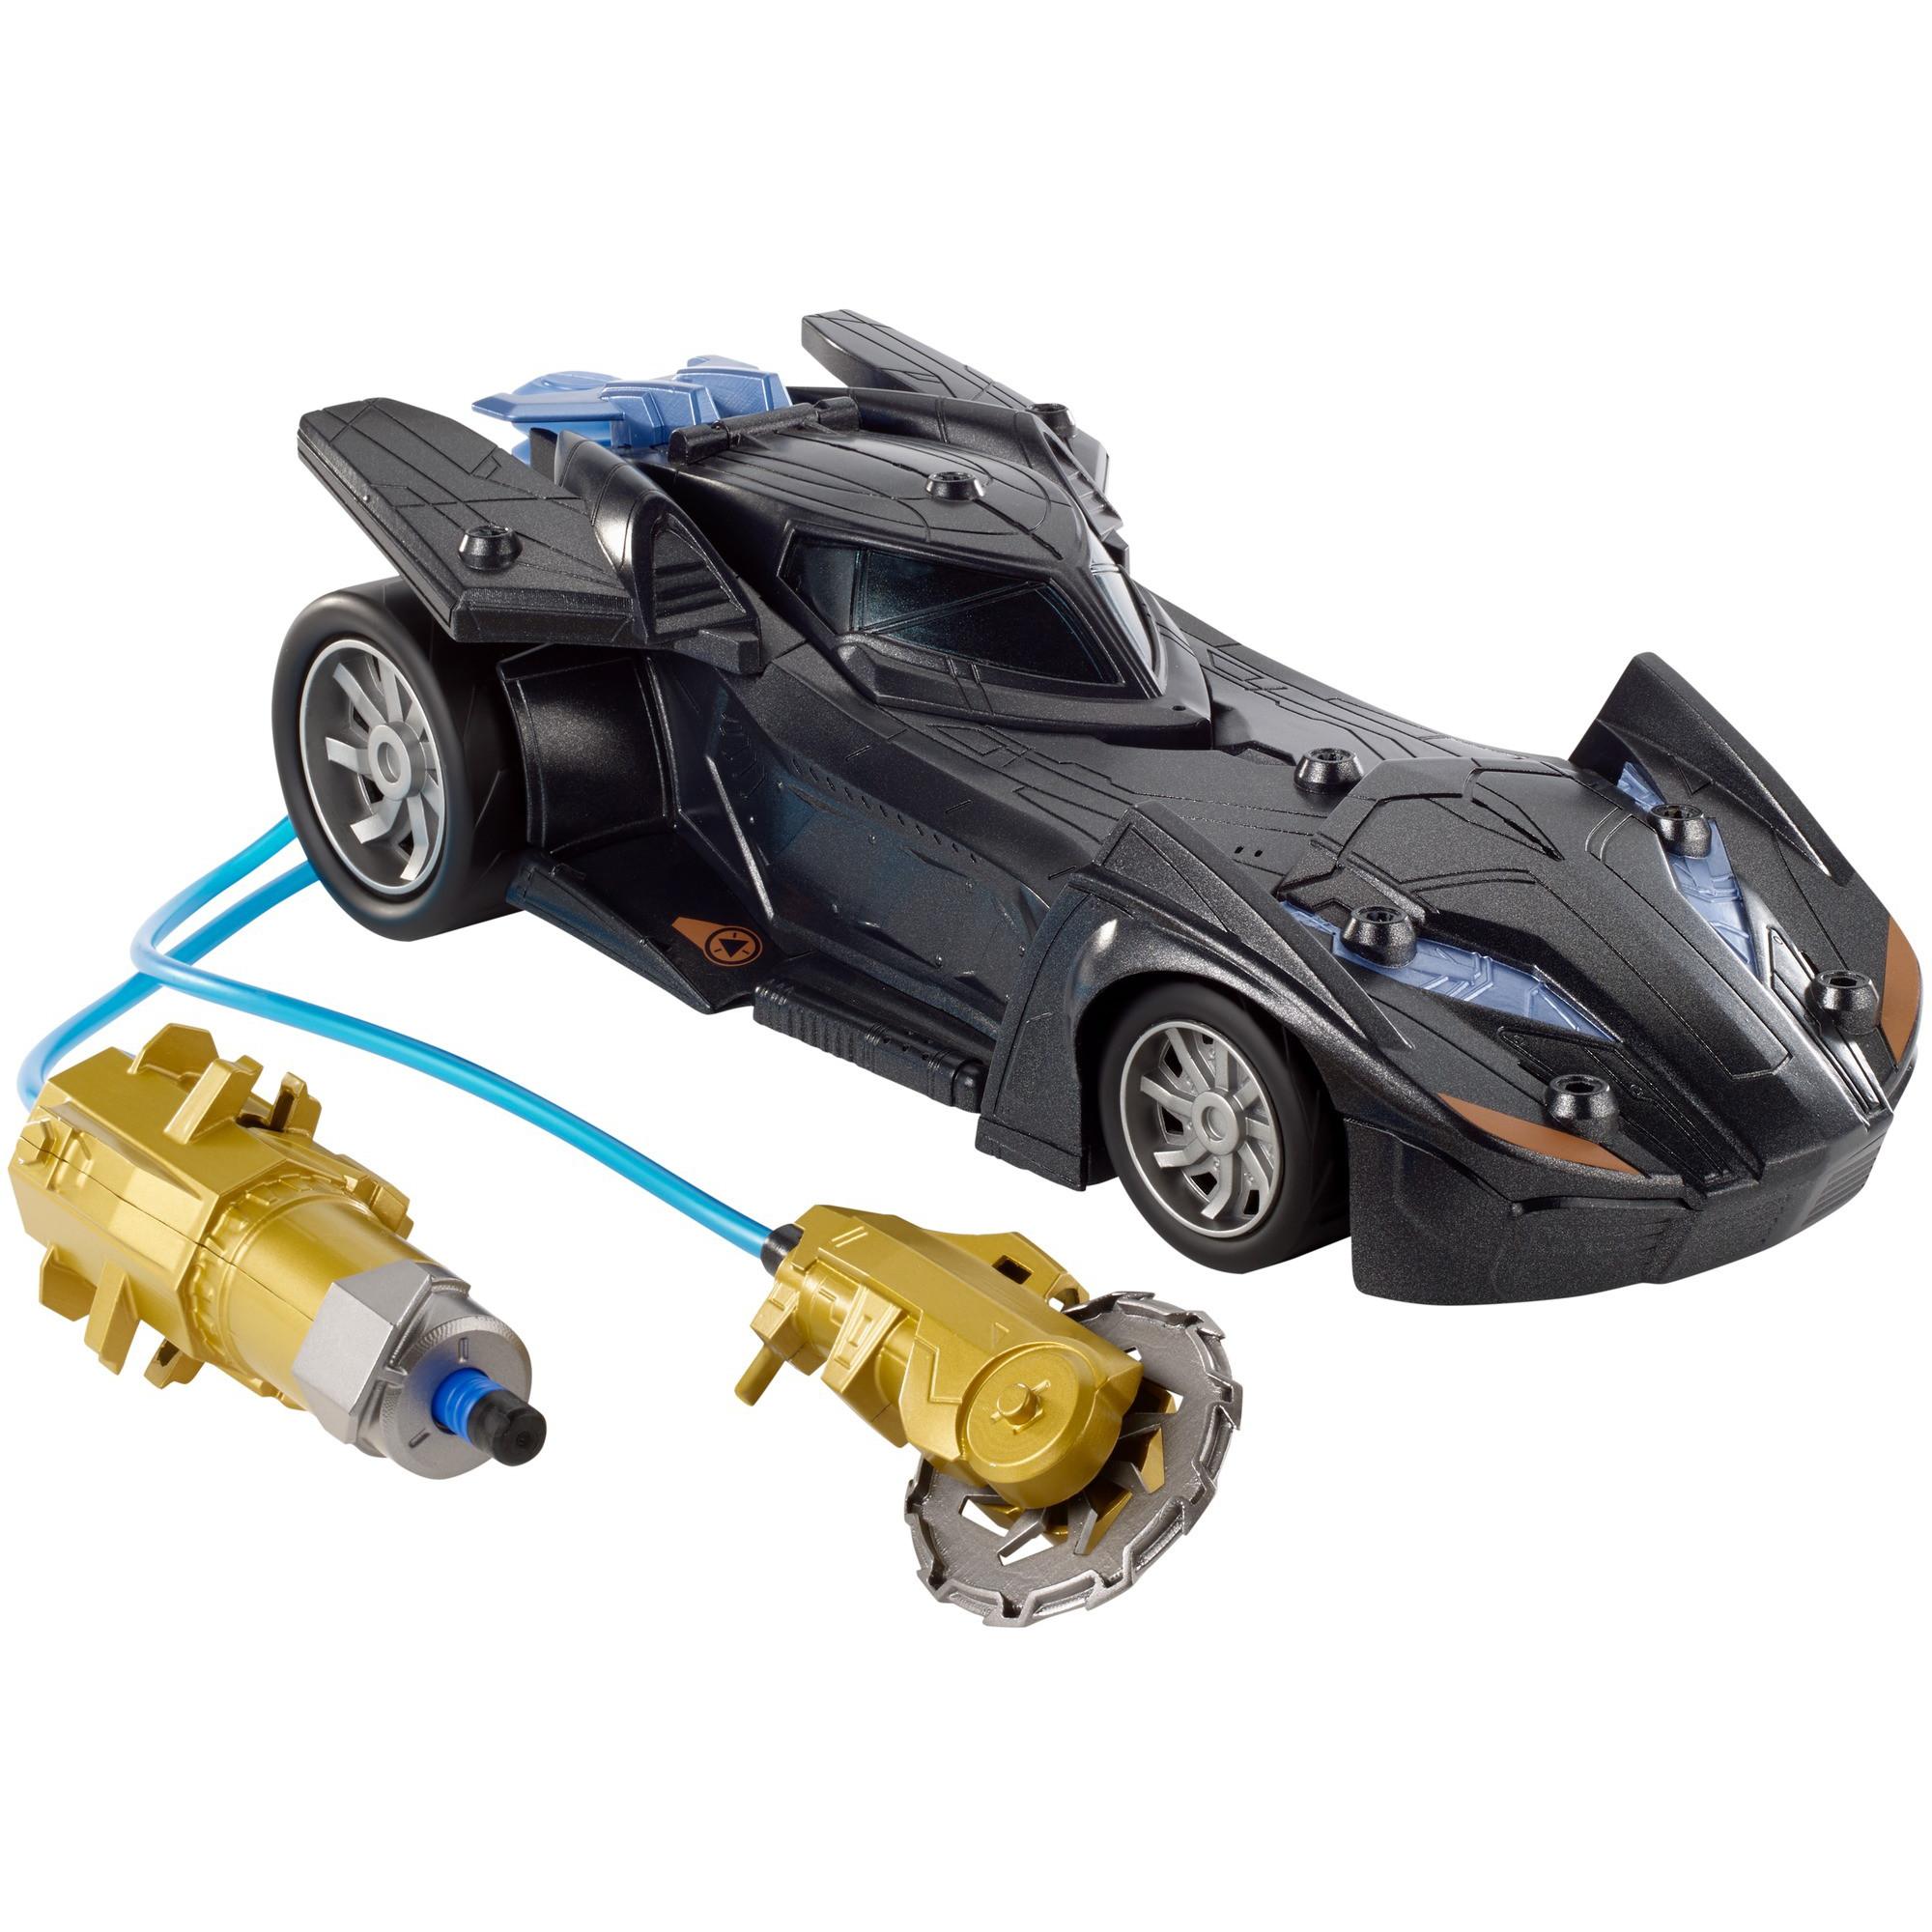 Batman Missions Air Power Cannon Attack Batmobile Vehicle - image 1 of 8